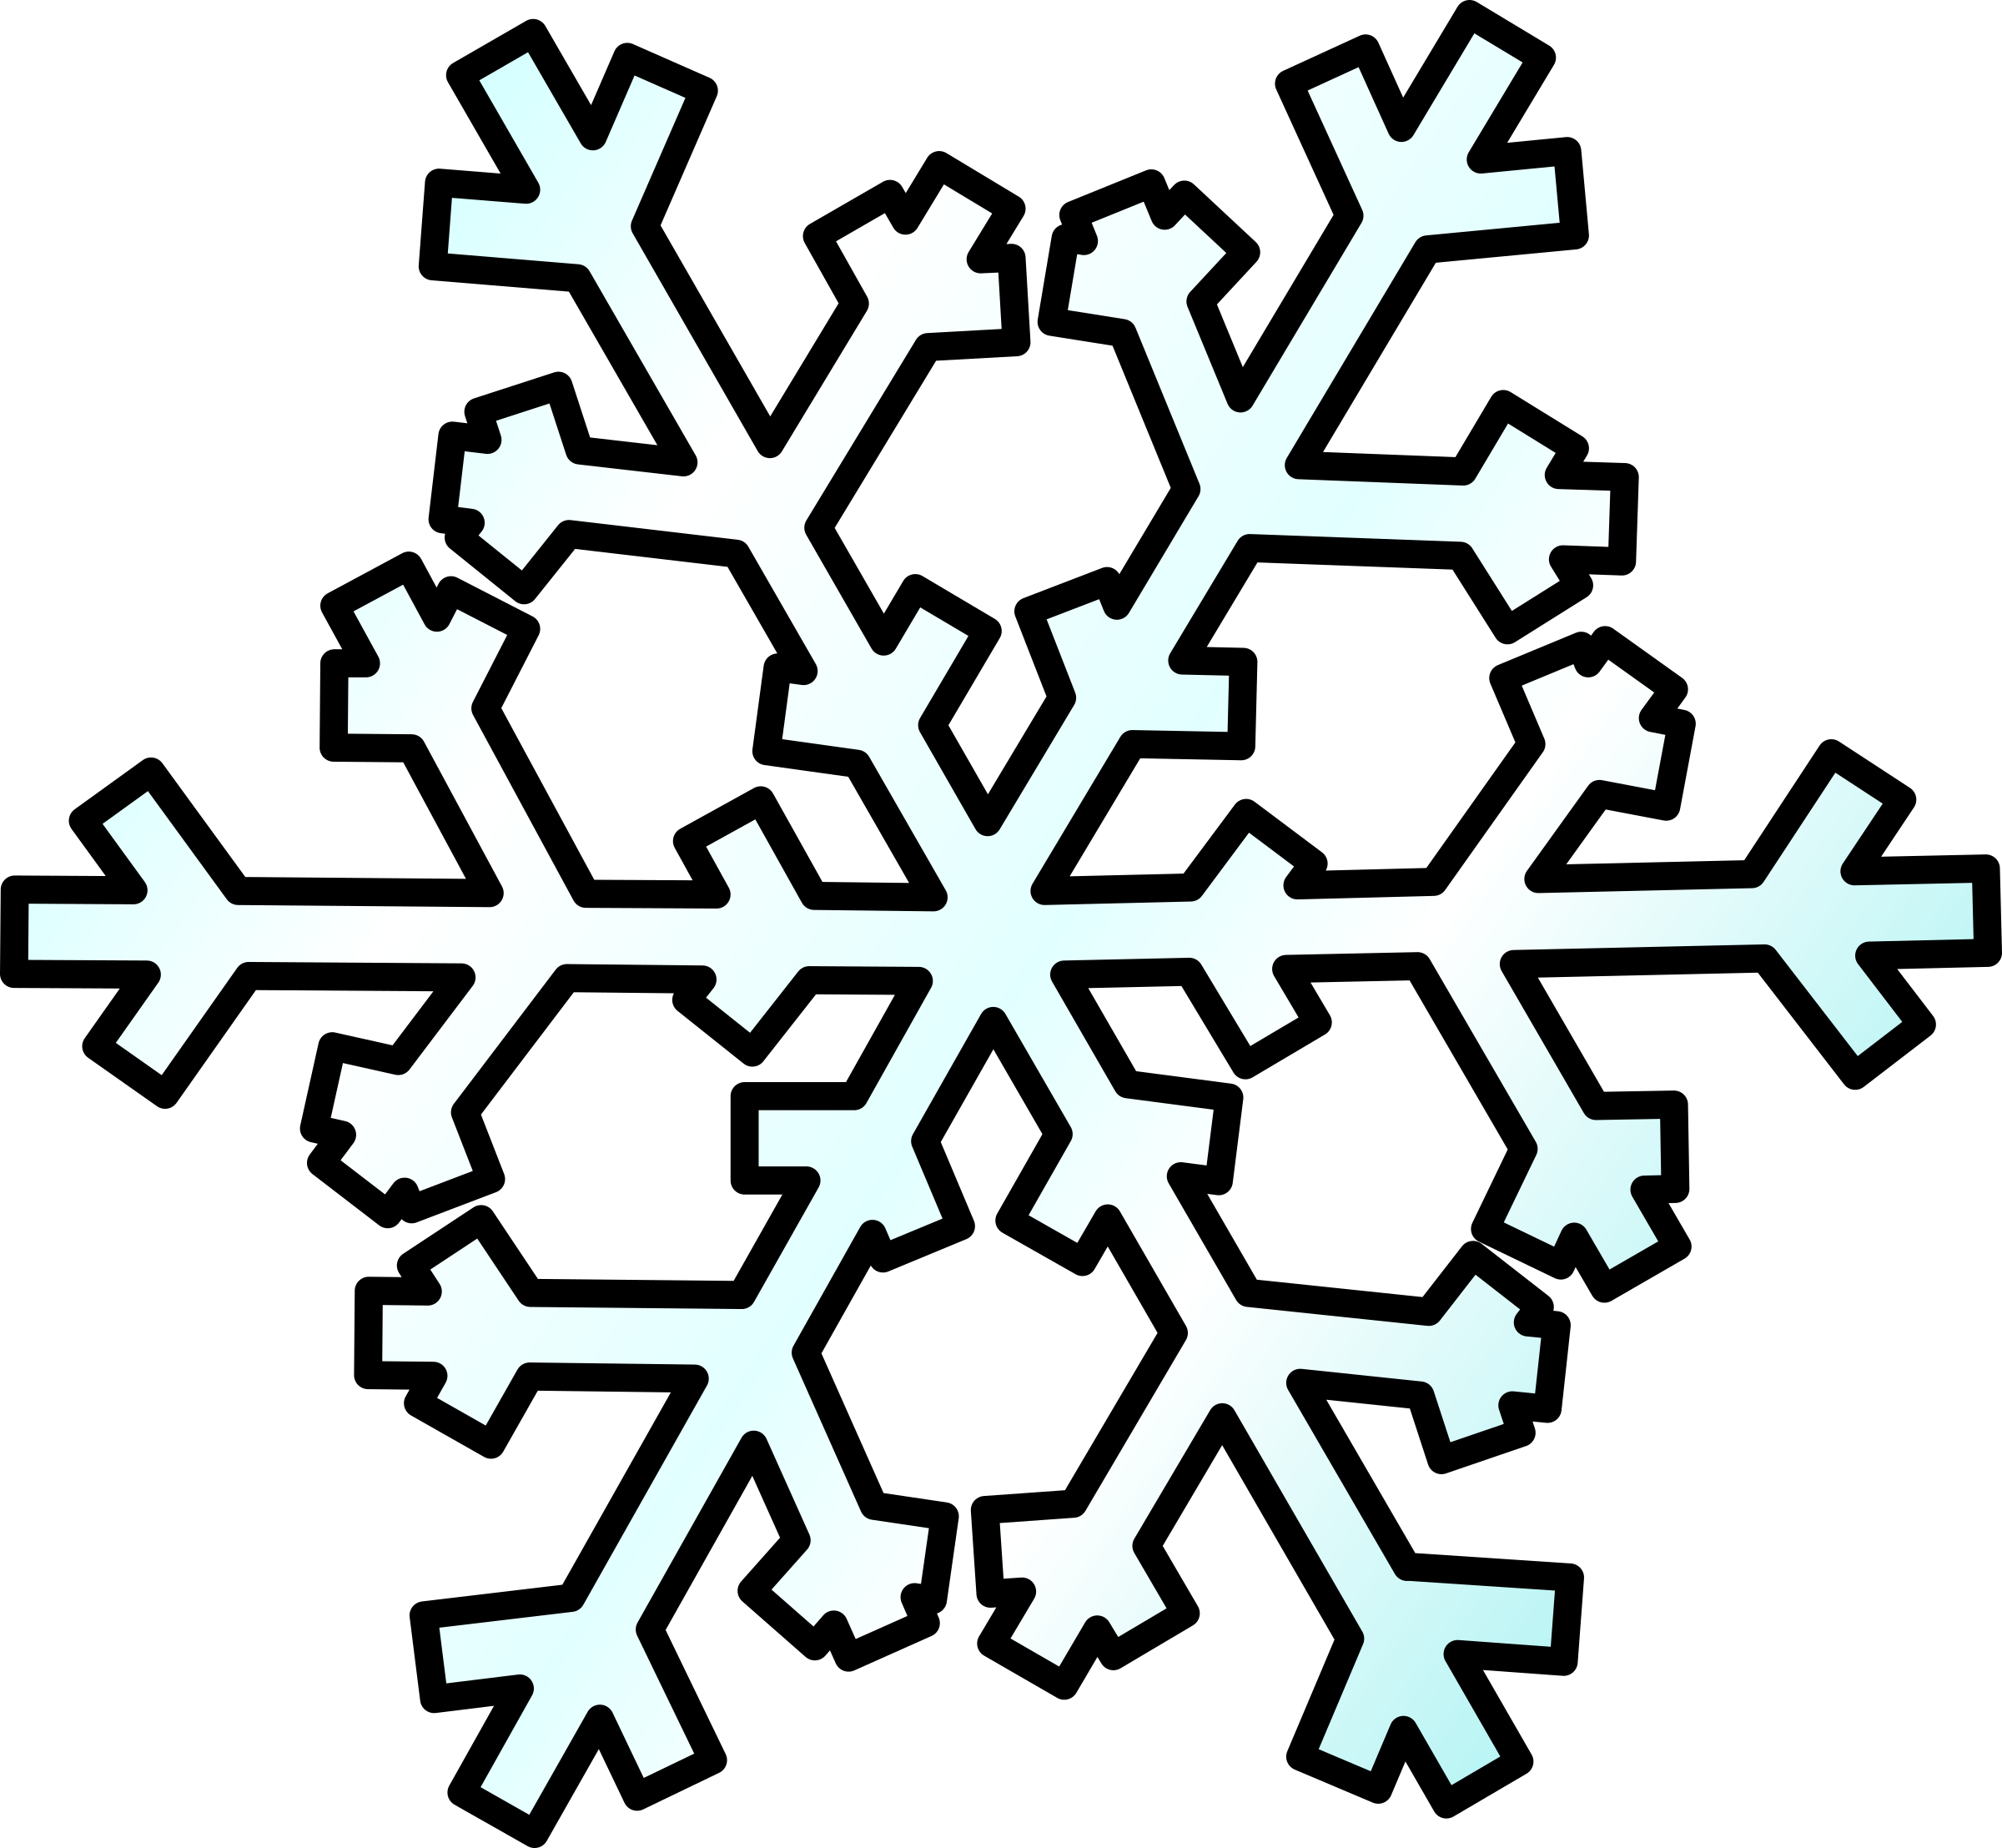 Clipart snowflake jpeg. Snow cilpart neoteric design